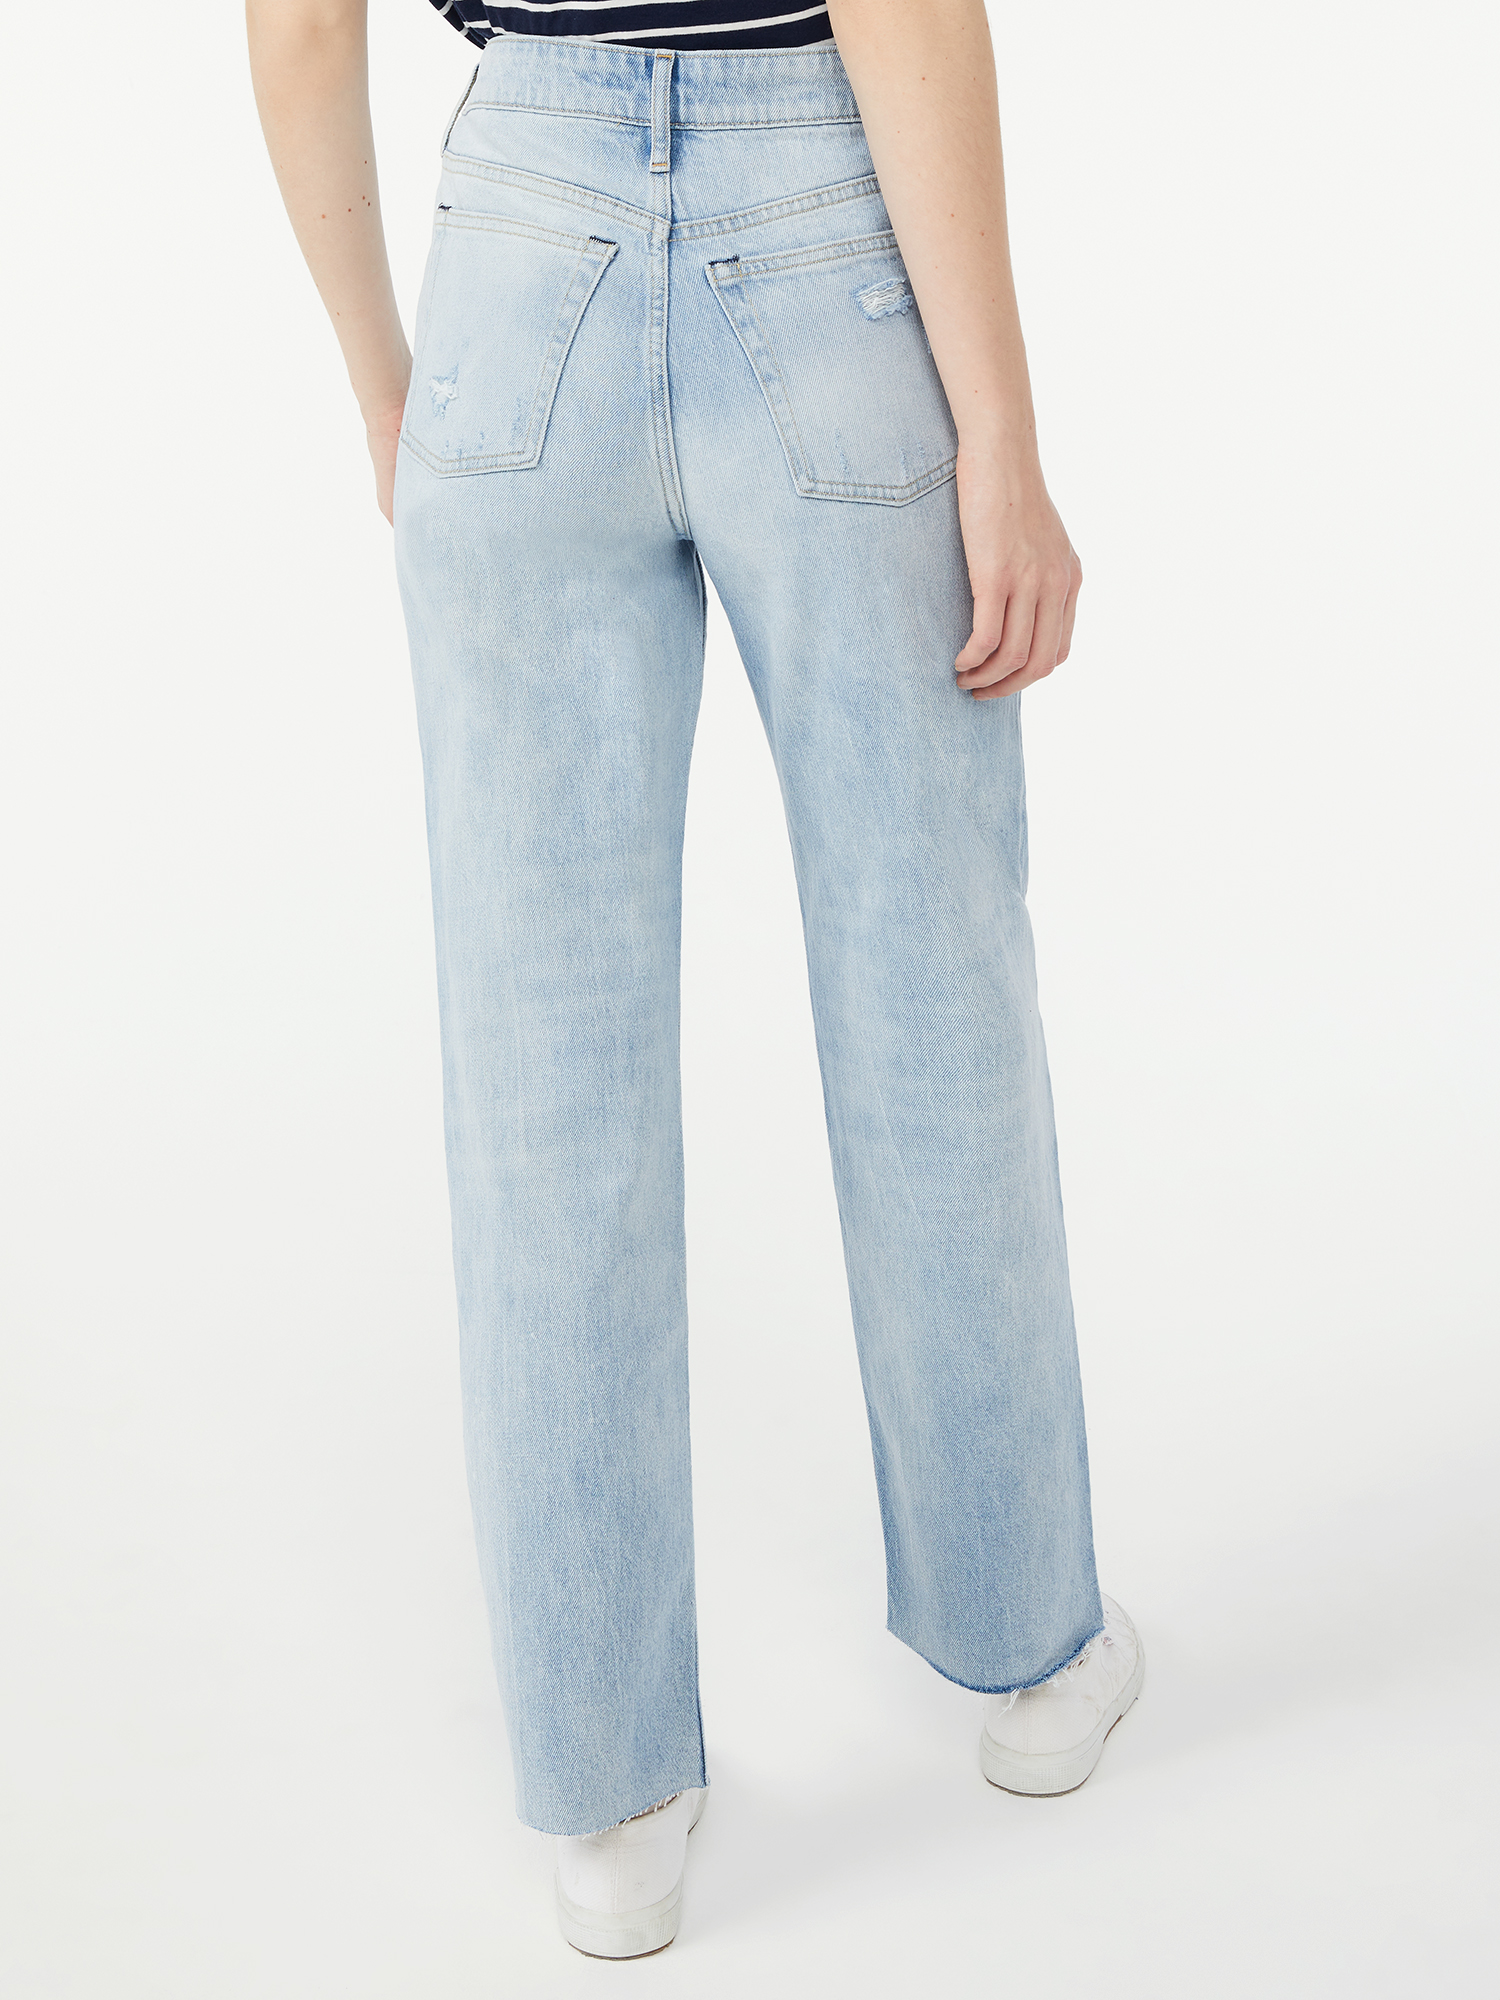 Free Assembly Women's Super High Rise Straight Jeans - image 4 of 5